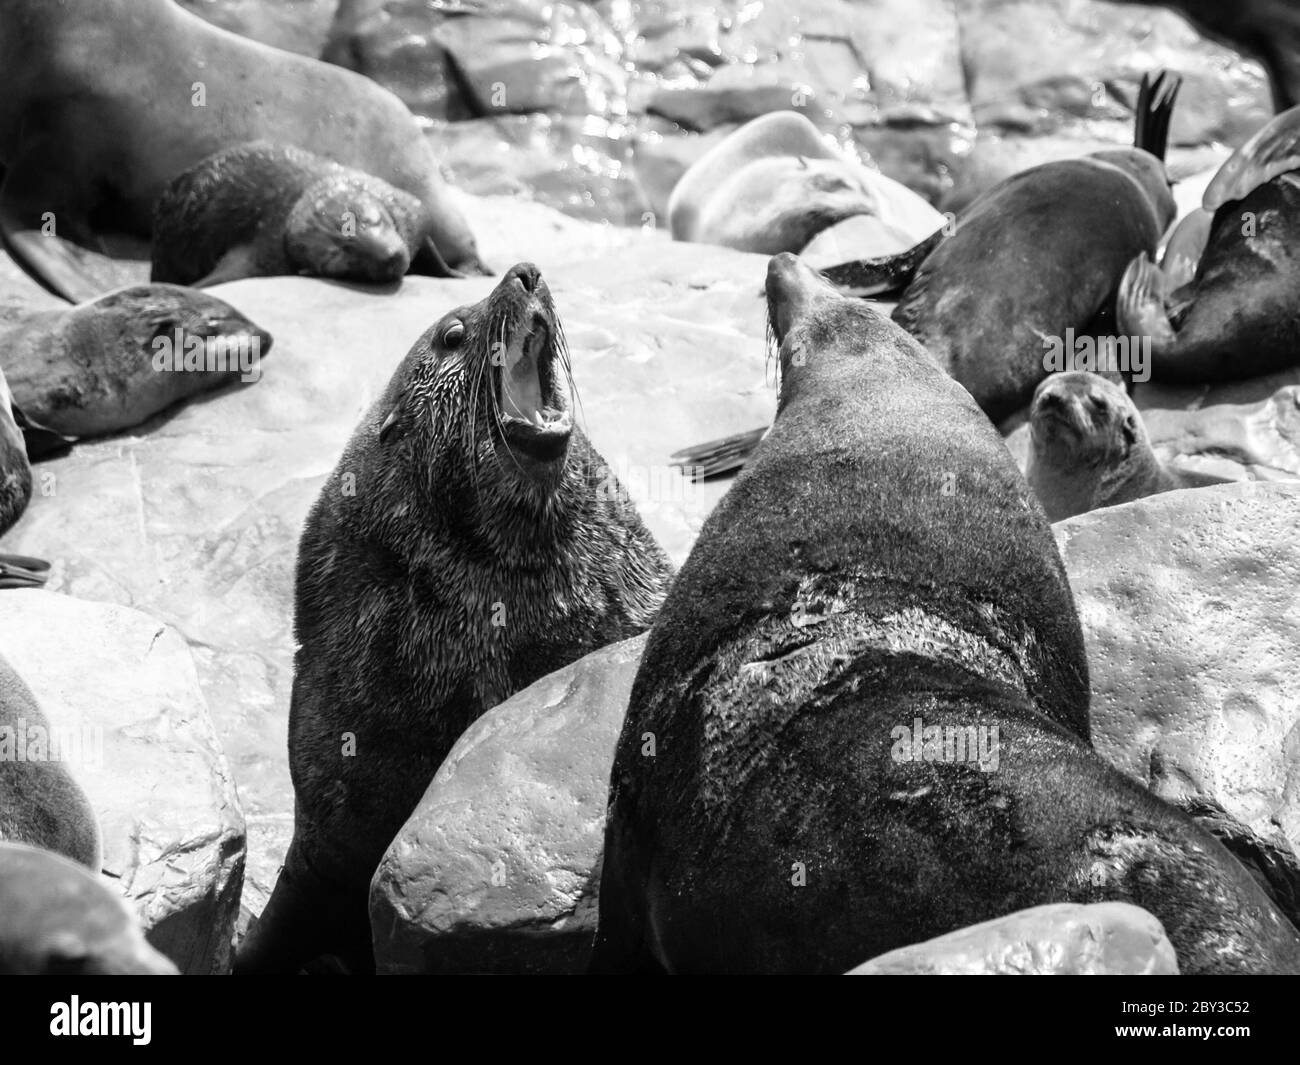 Two dangerous brown fur seals fighting on a rock. Black and white image. Stock Photo